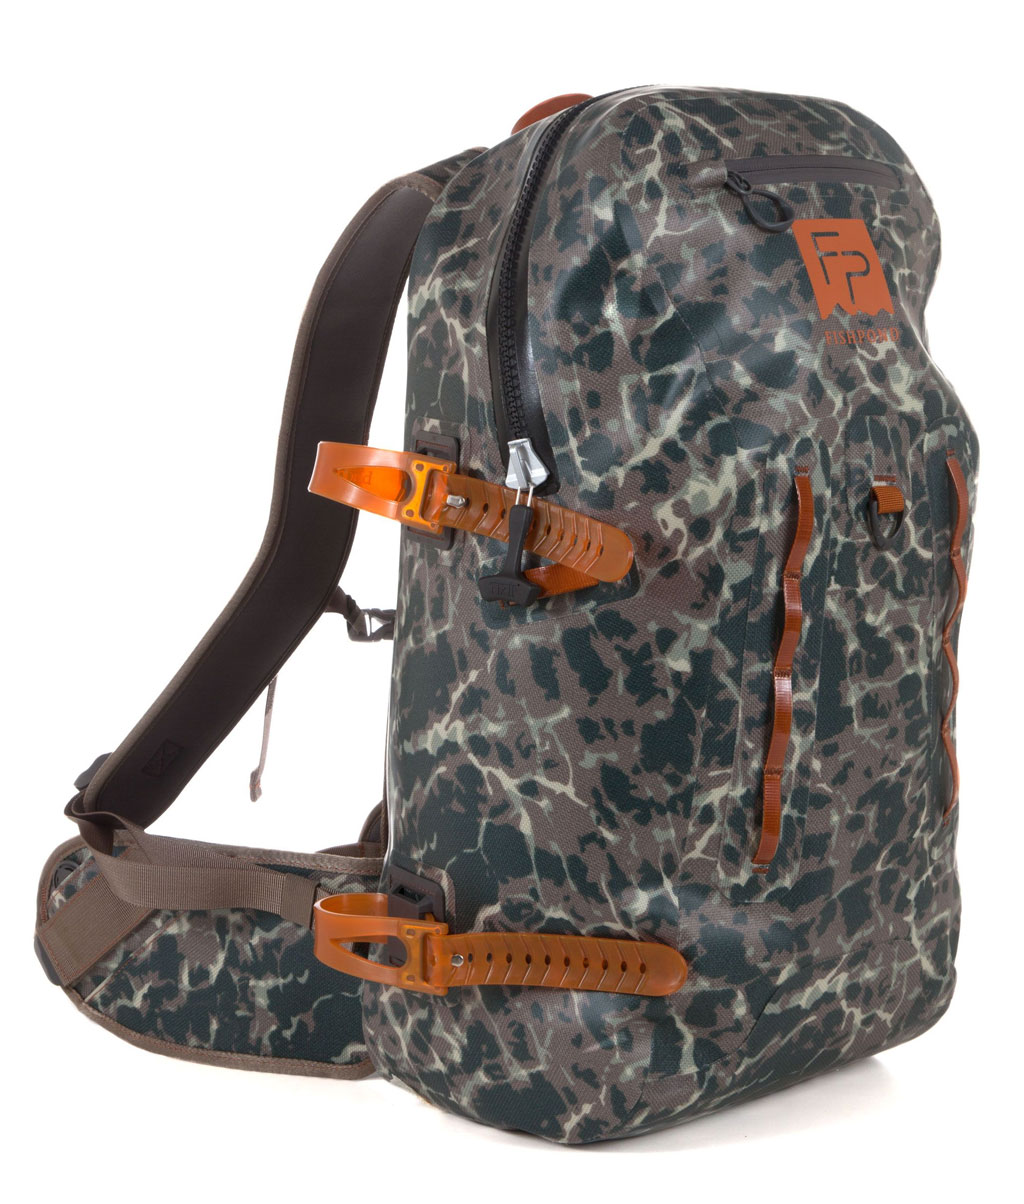 Fishpond Thunderhead Submersible Backpack - Riverbed Camo - Click Image to Close